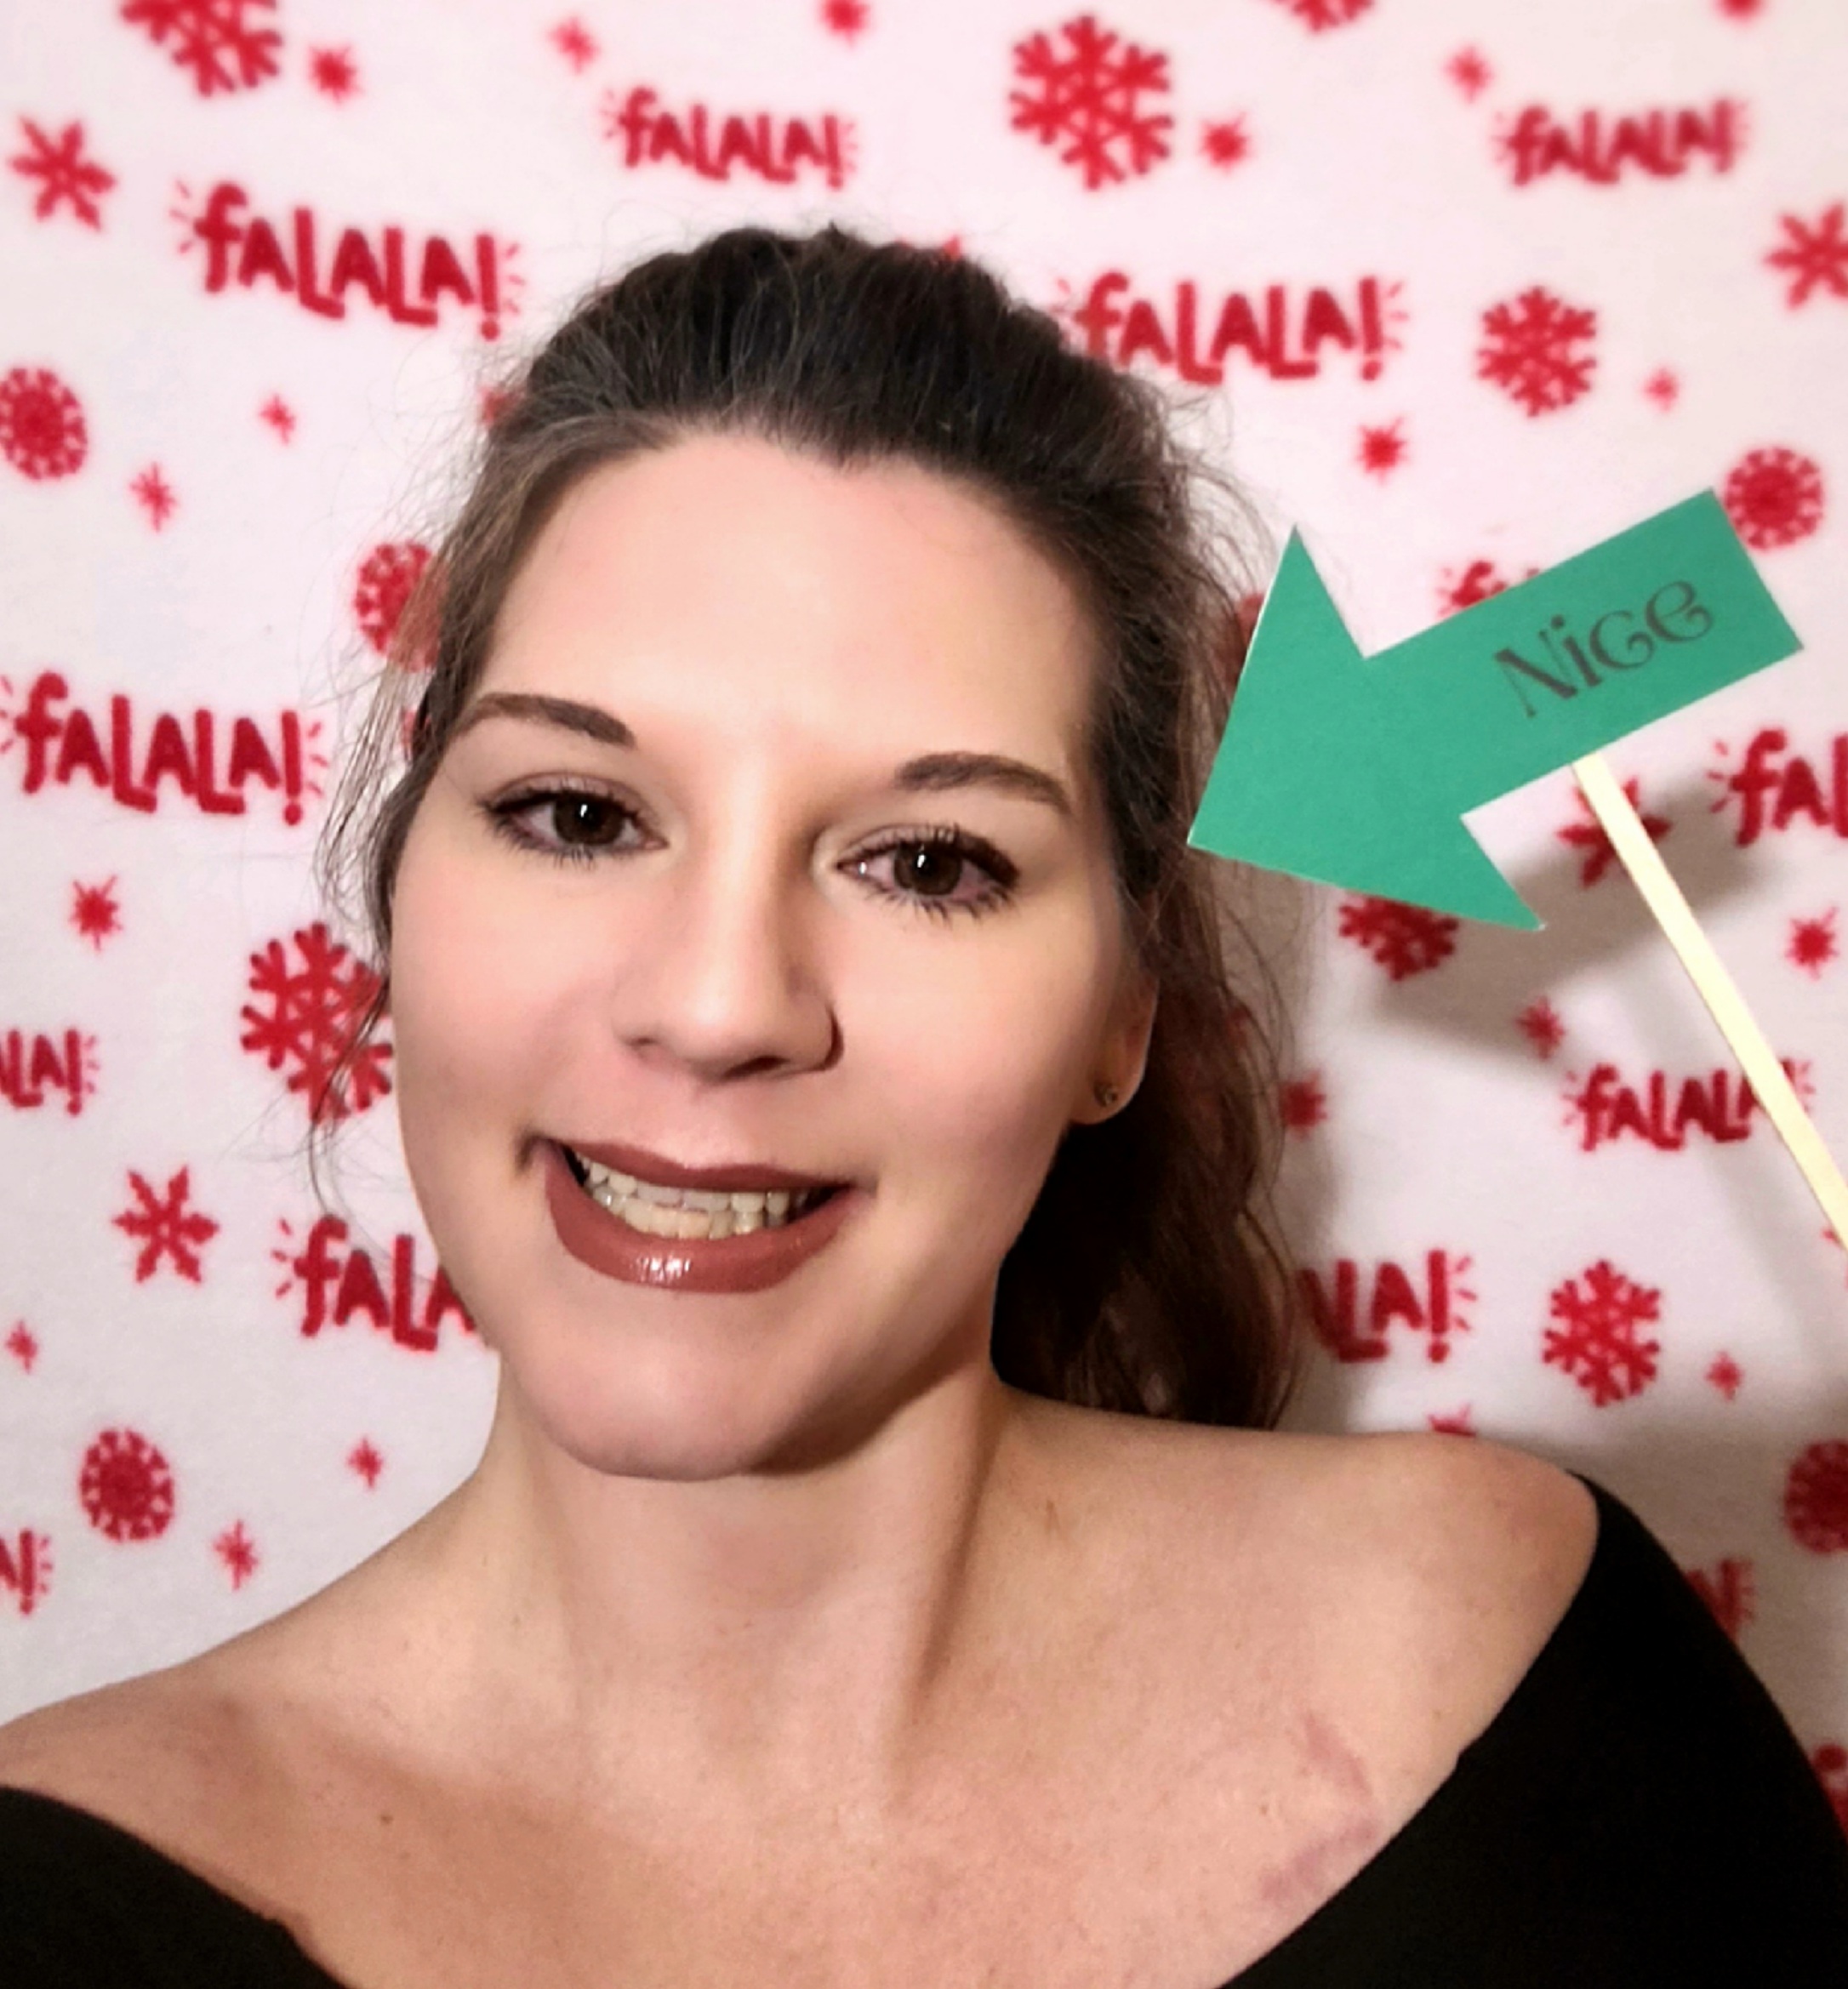 Me with a "Nice" arrow prop in the DIY Christmas photobooth set up with a Christmas blanket backdrop on Elf family movie night.